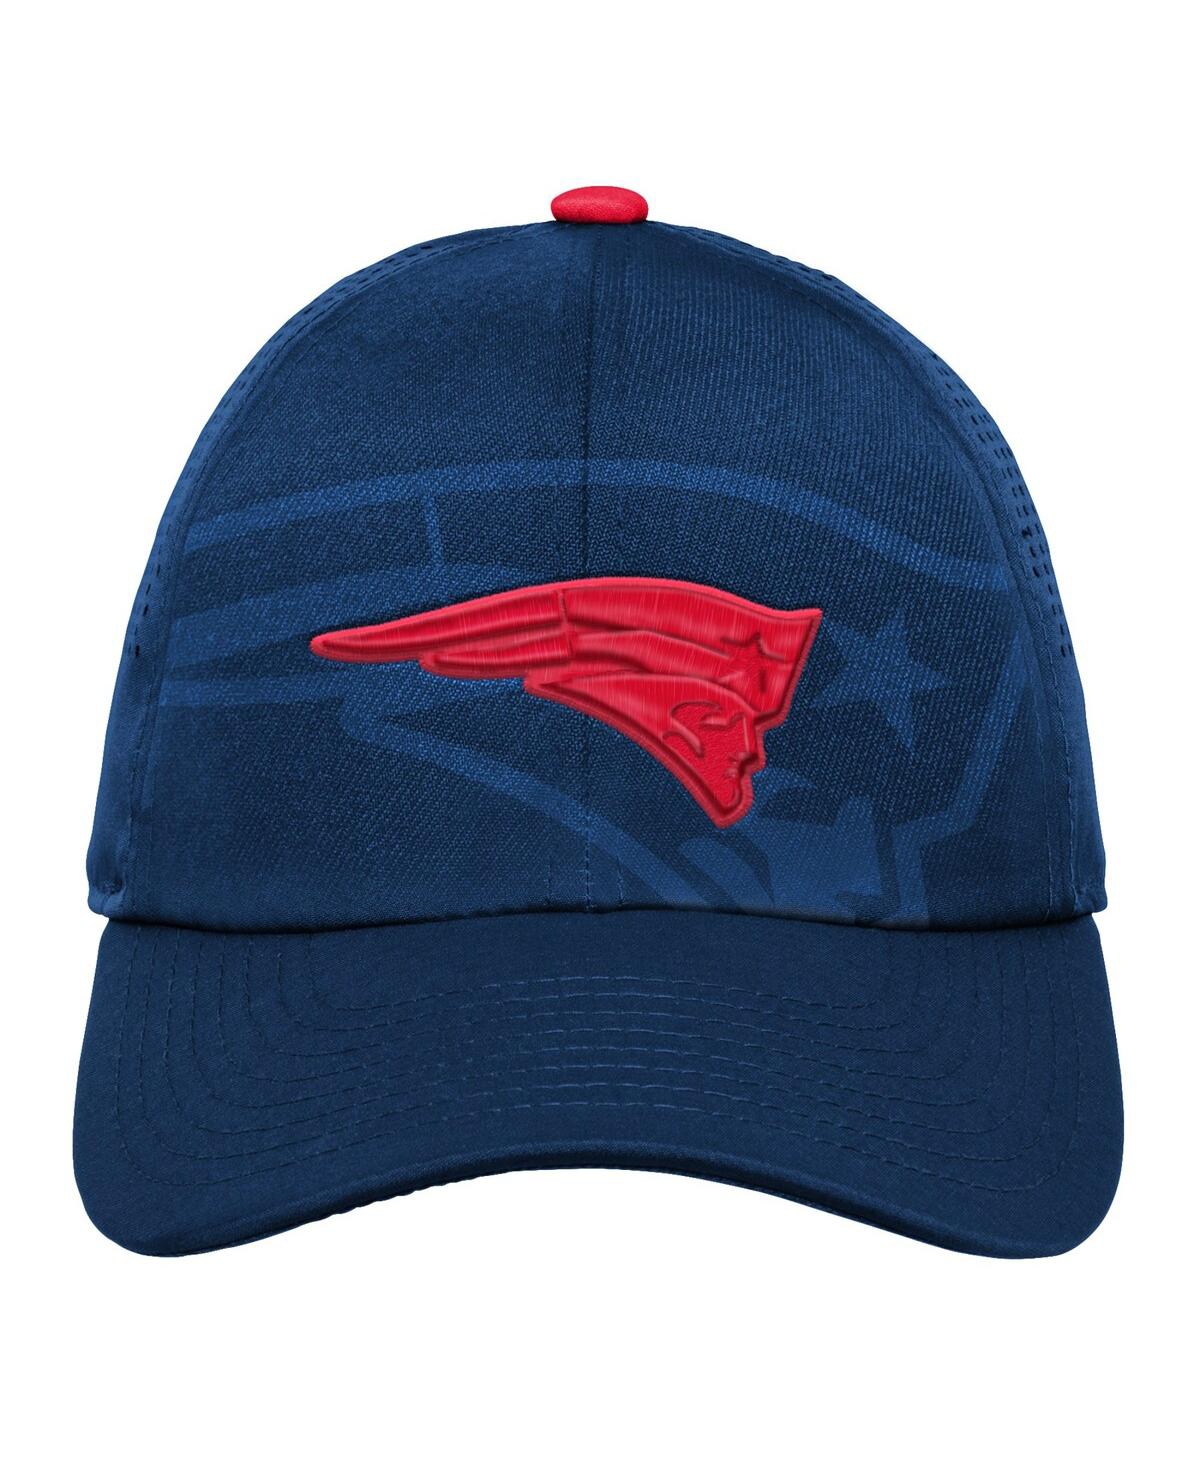 Shop Outerstuff Youth Boys And Girls Navy New England Patriots Tailgate Adjustable Hat